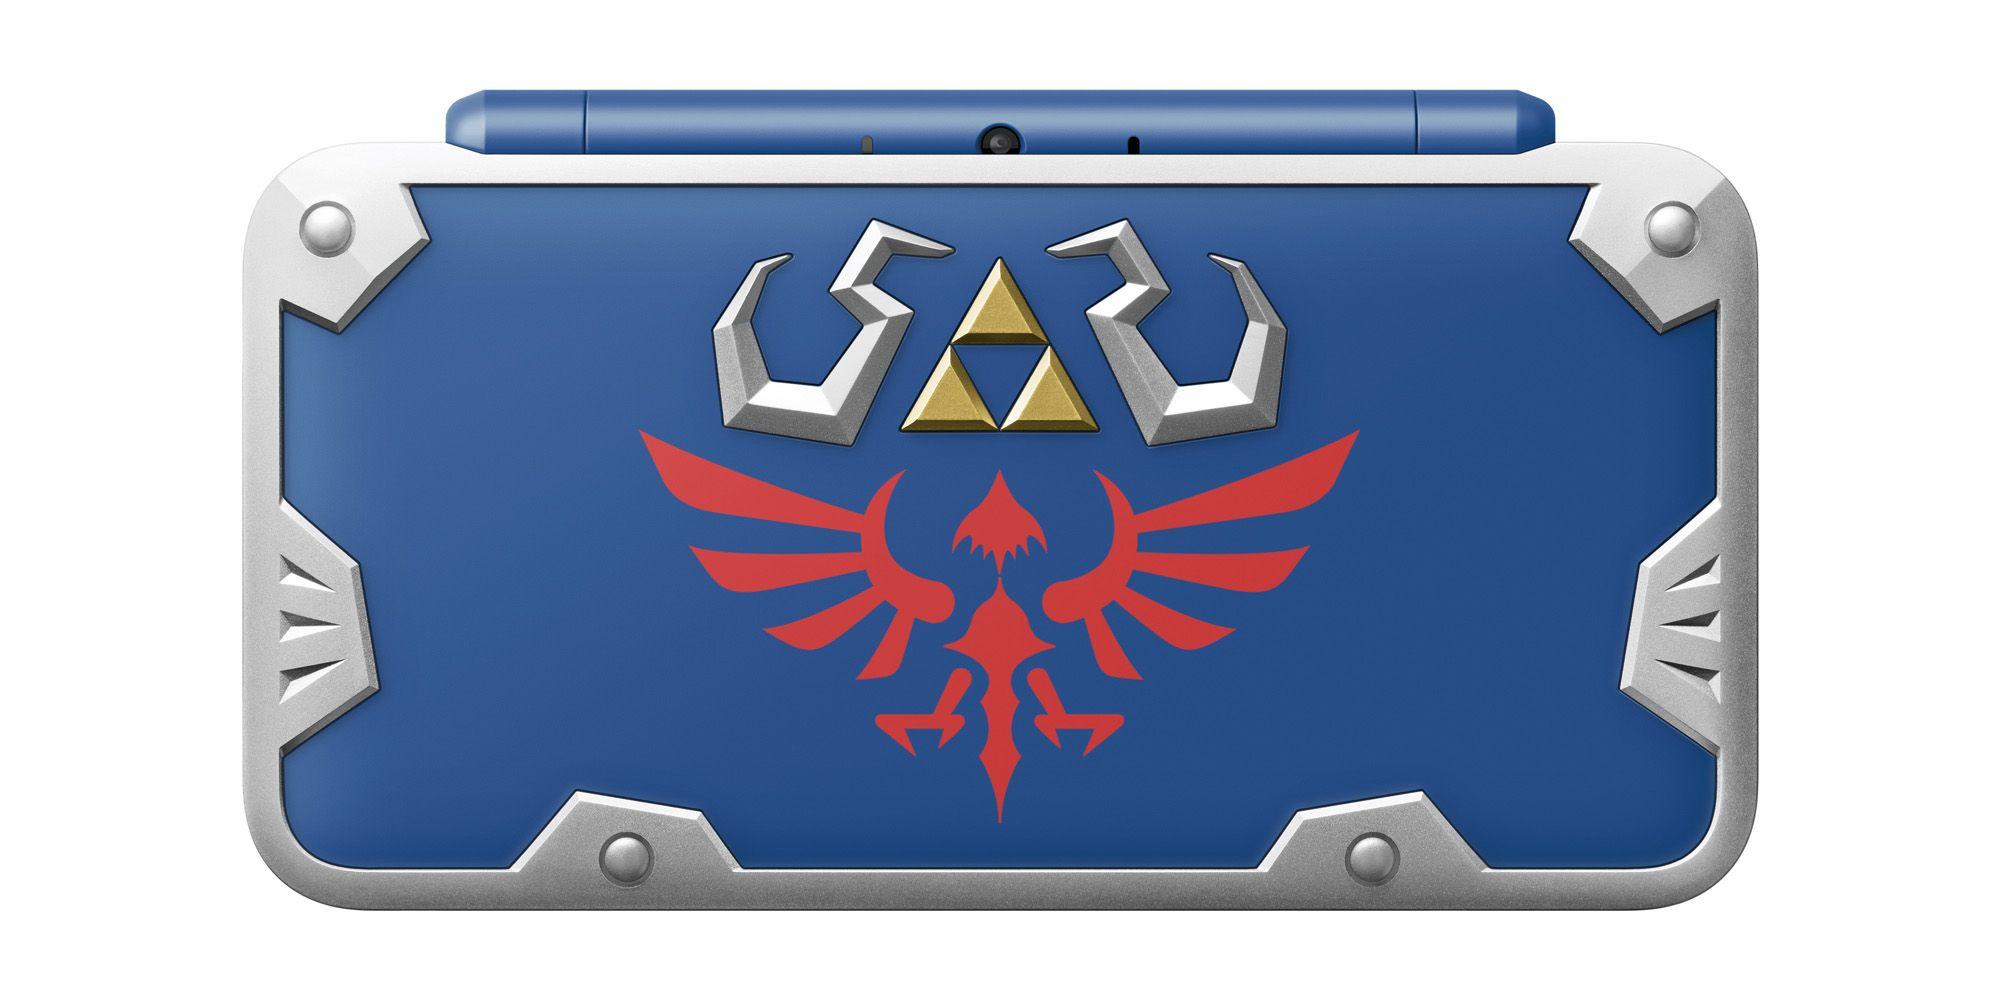 The blue 2DS XL is based on the Zelda Hylian shield with silver frame, Hylian Crest and Triforce.